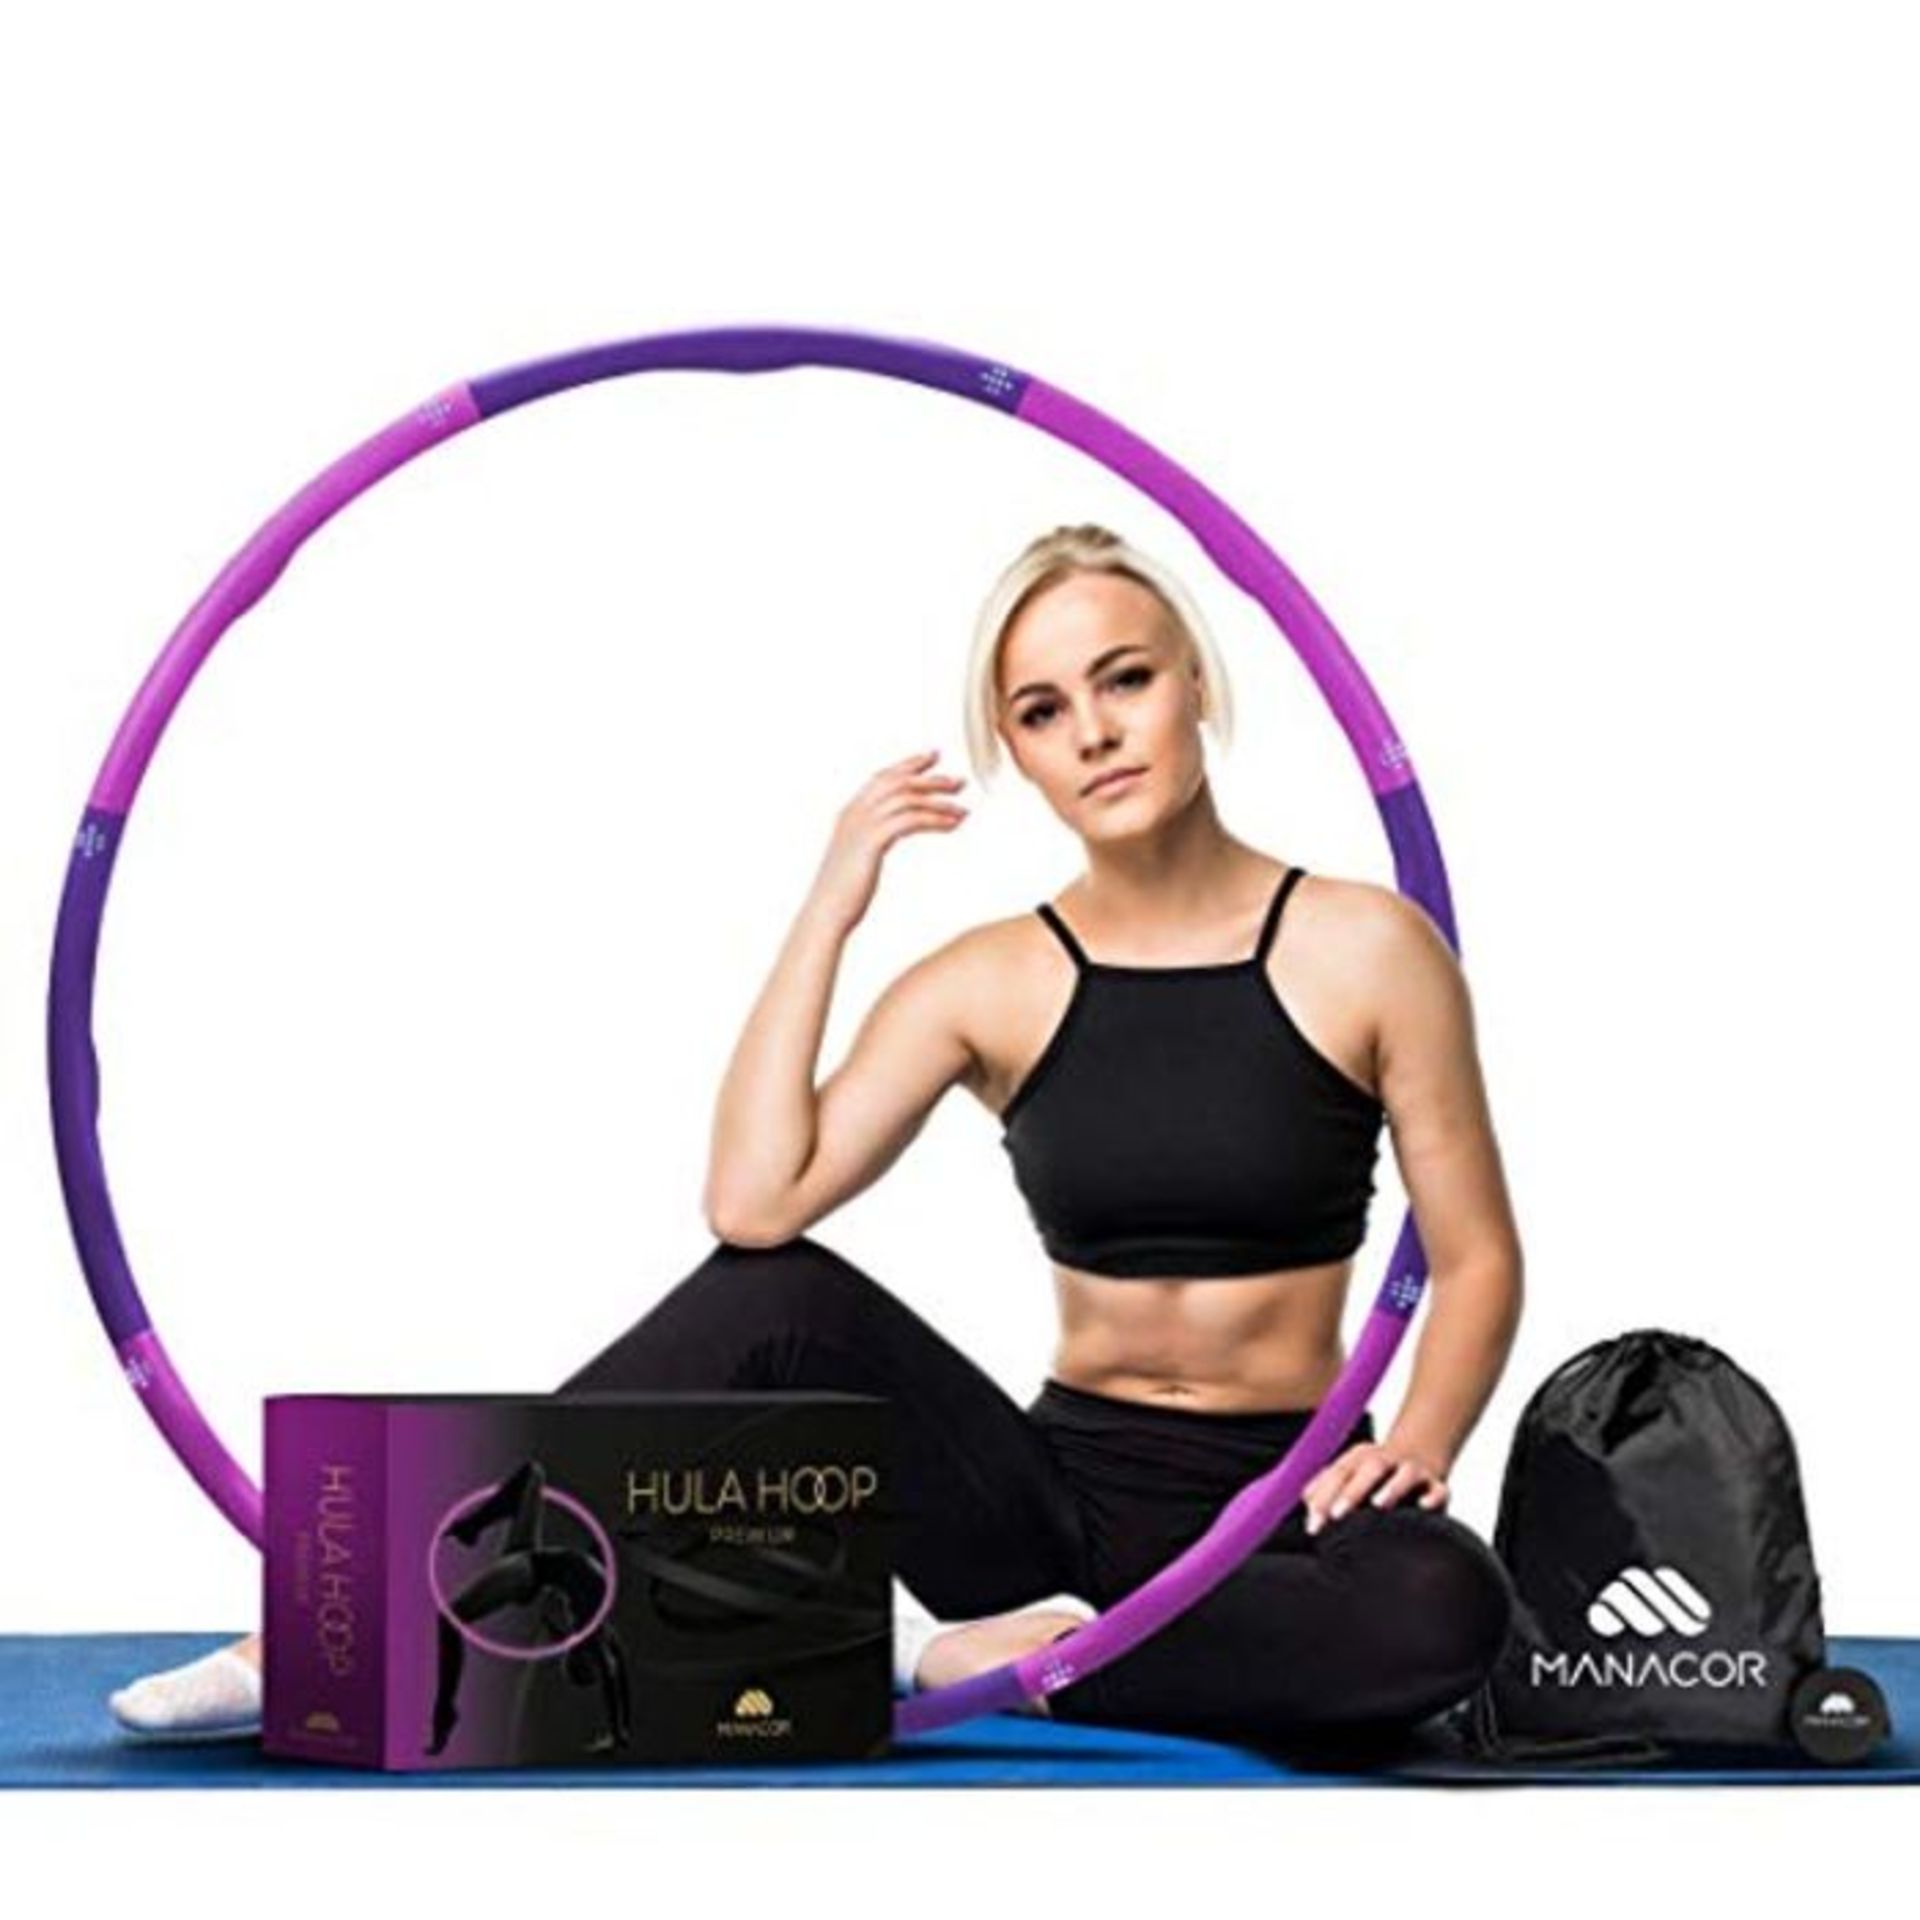 Manacor Hula Hoop for Adults & Children for Weight Loss and Massage, A 6-8 Piece Remov